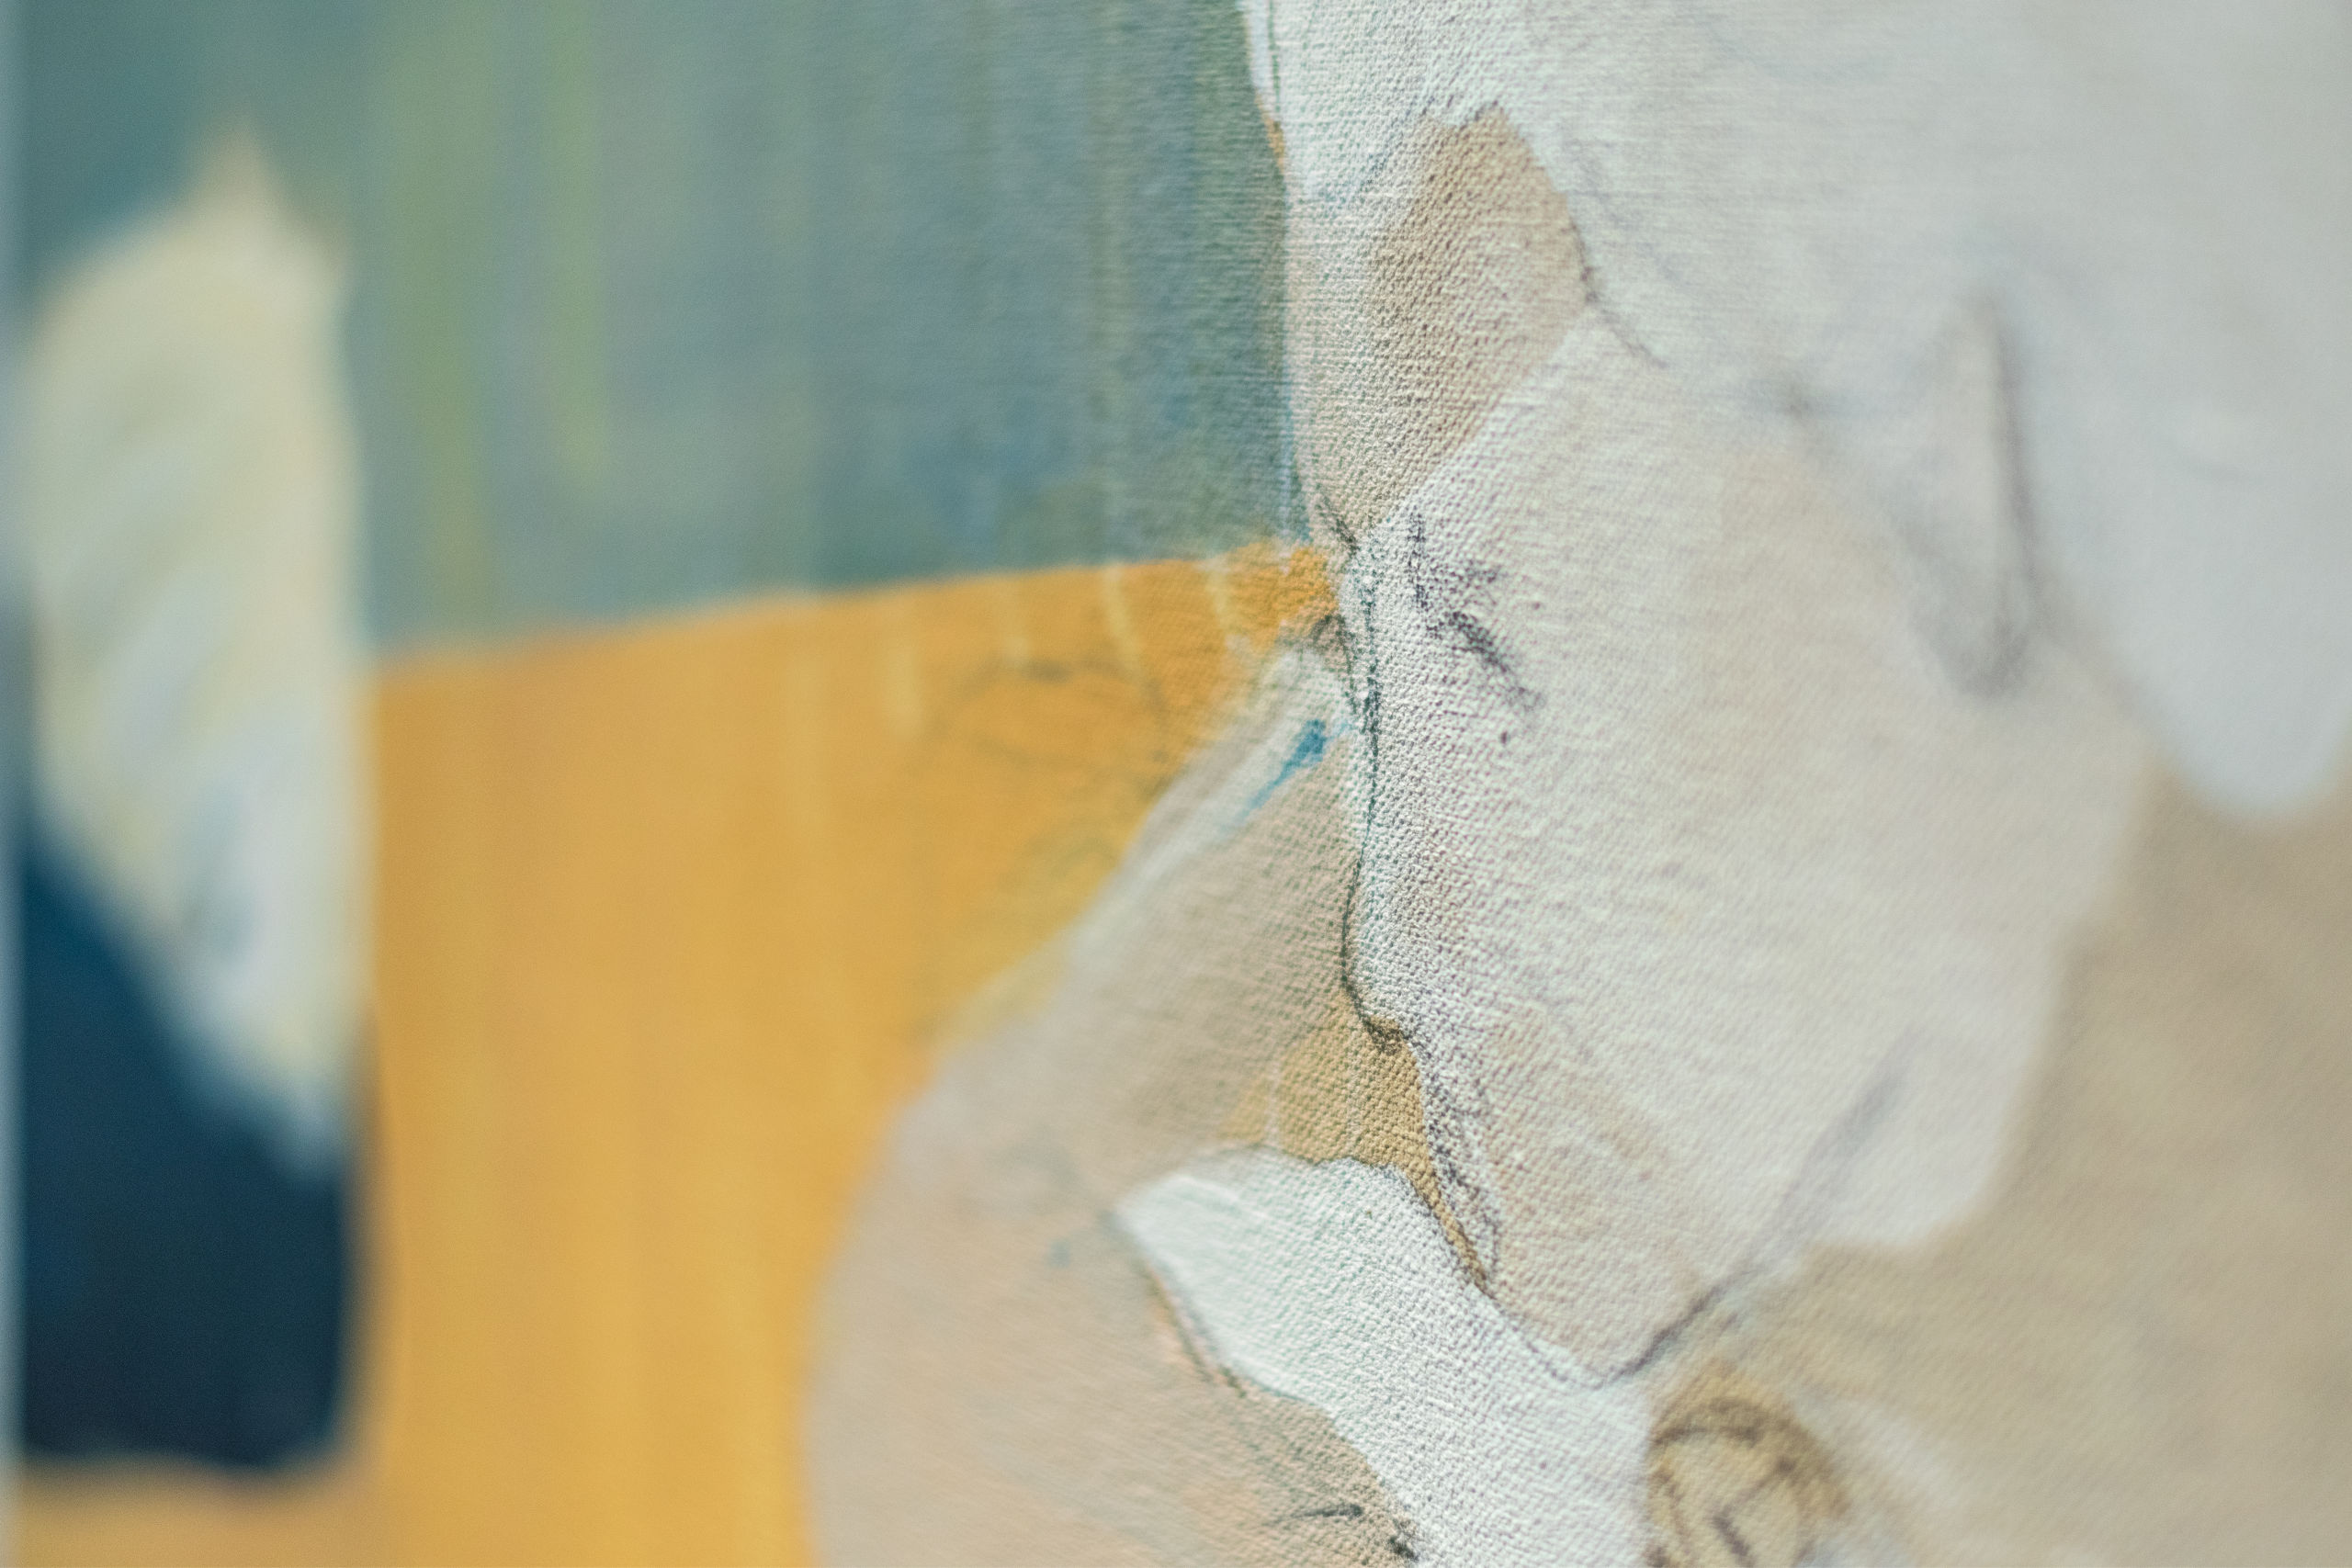 Close-up of painting showing tan, yellow and teal tones.